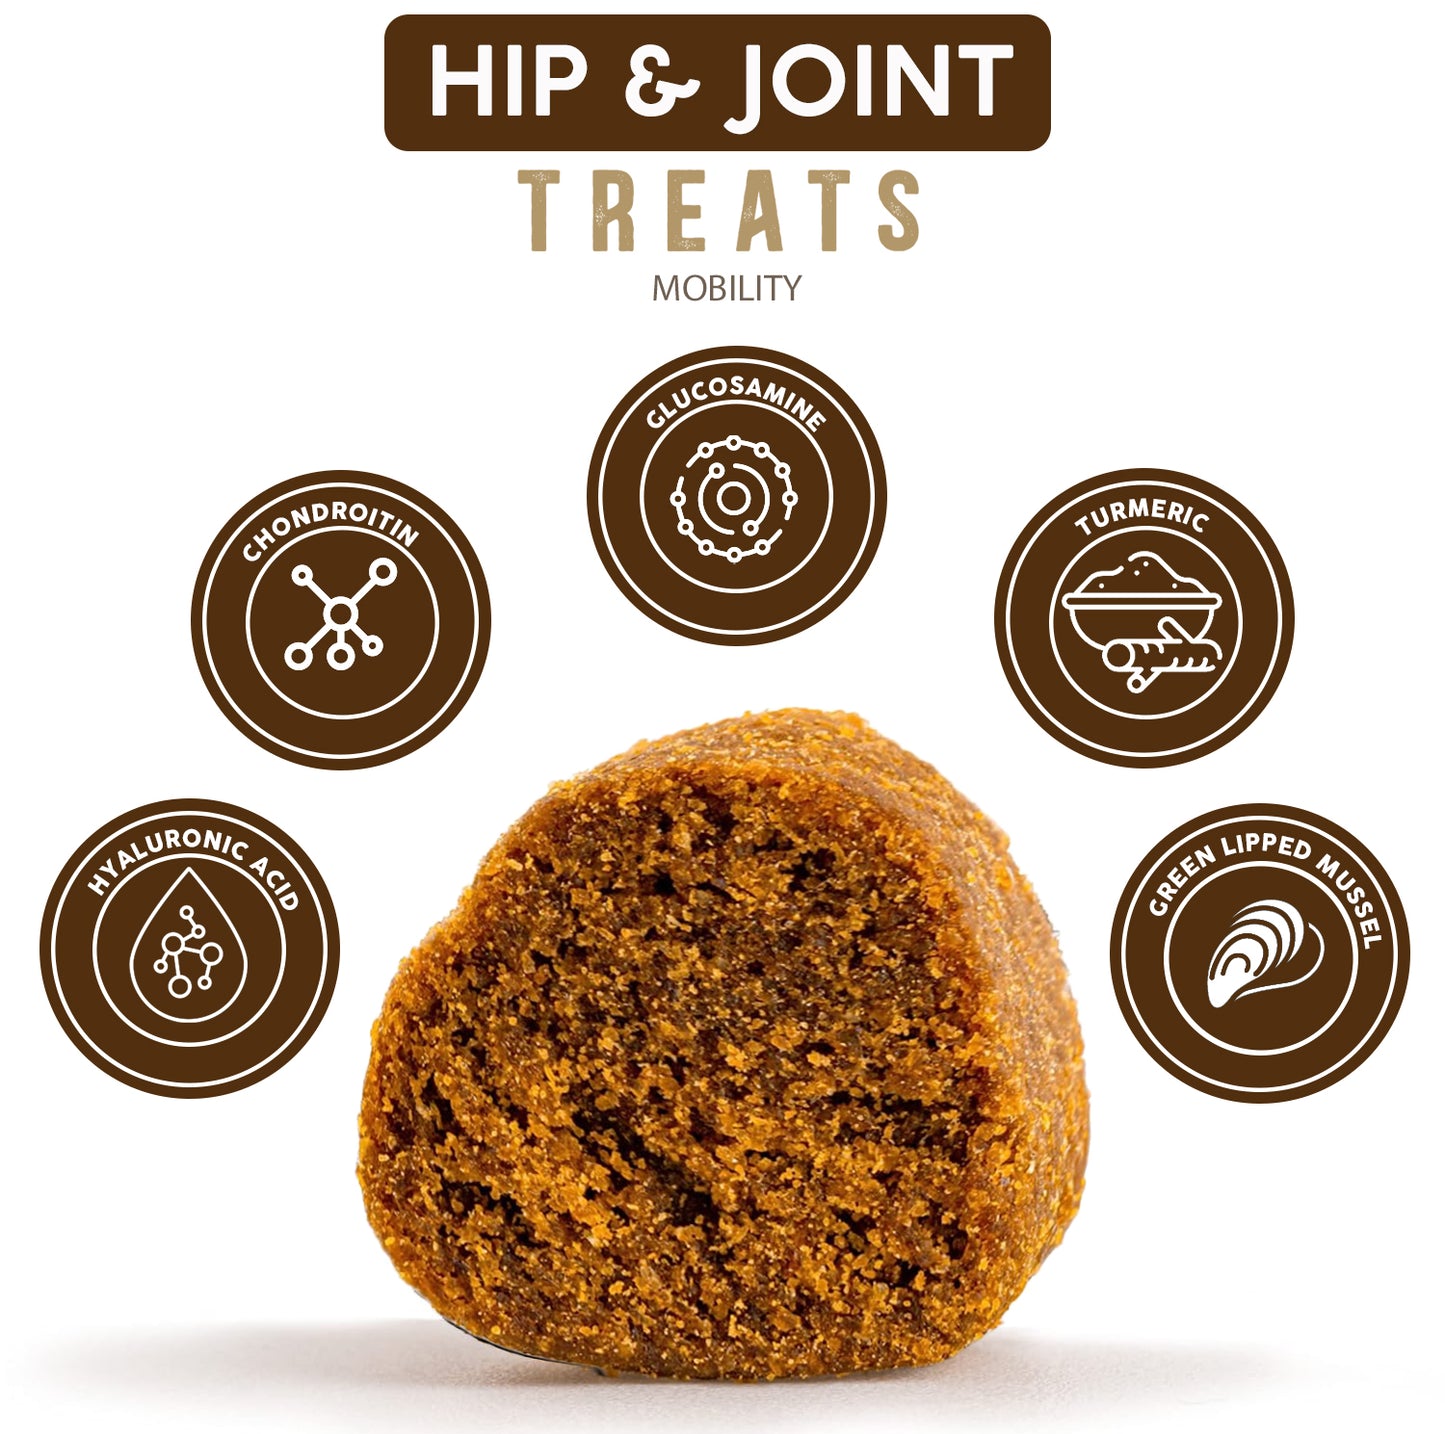 Hip & Joint Mobility %100 Natural Treat For Dogs 90 Chews - 12 oz